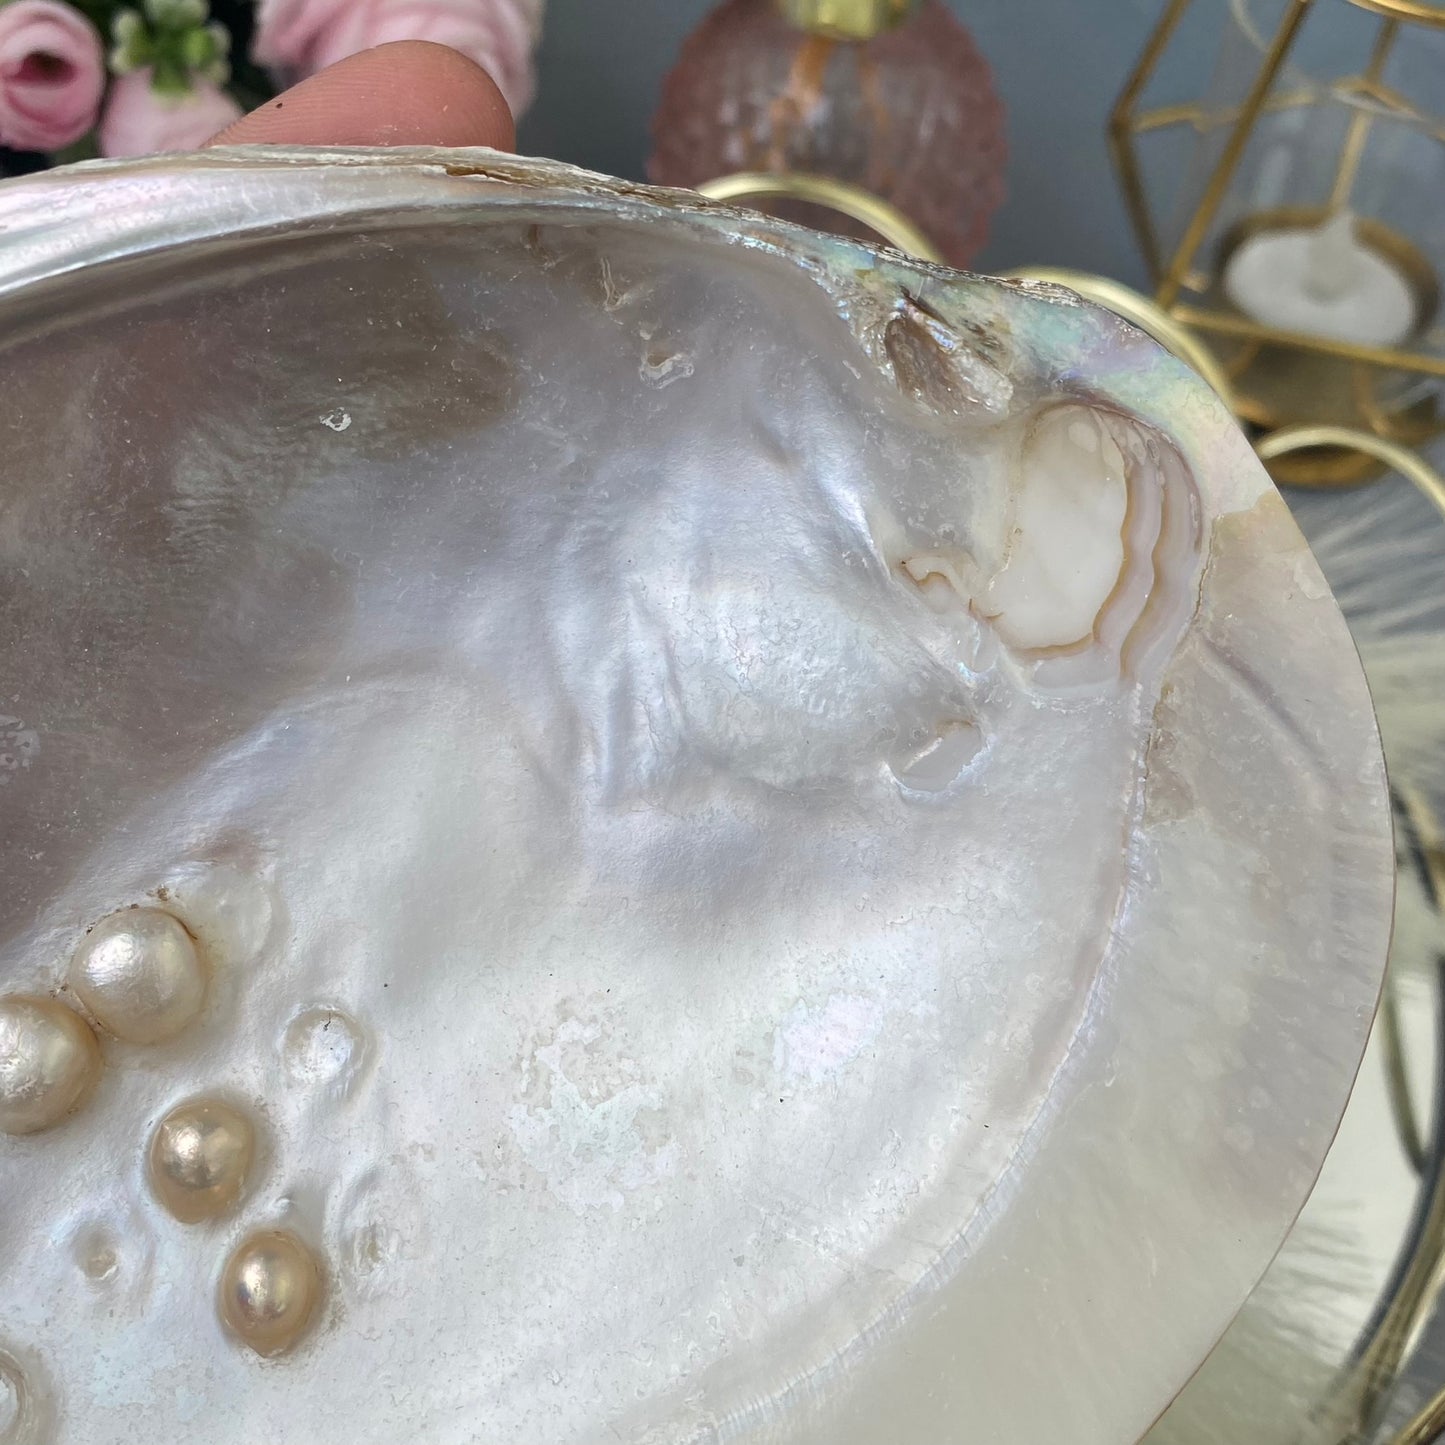 Shell with pearls